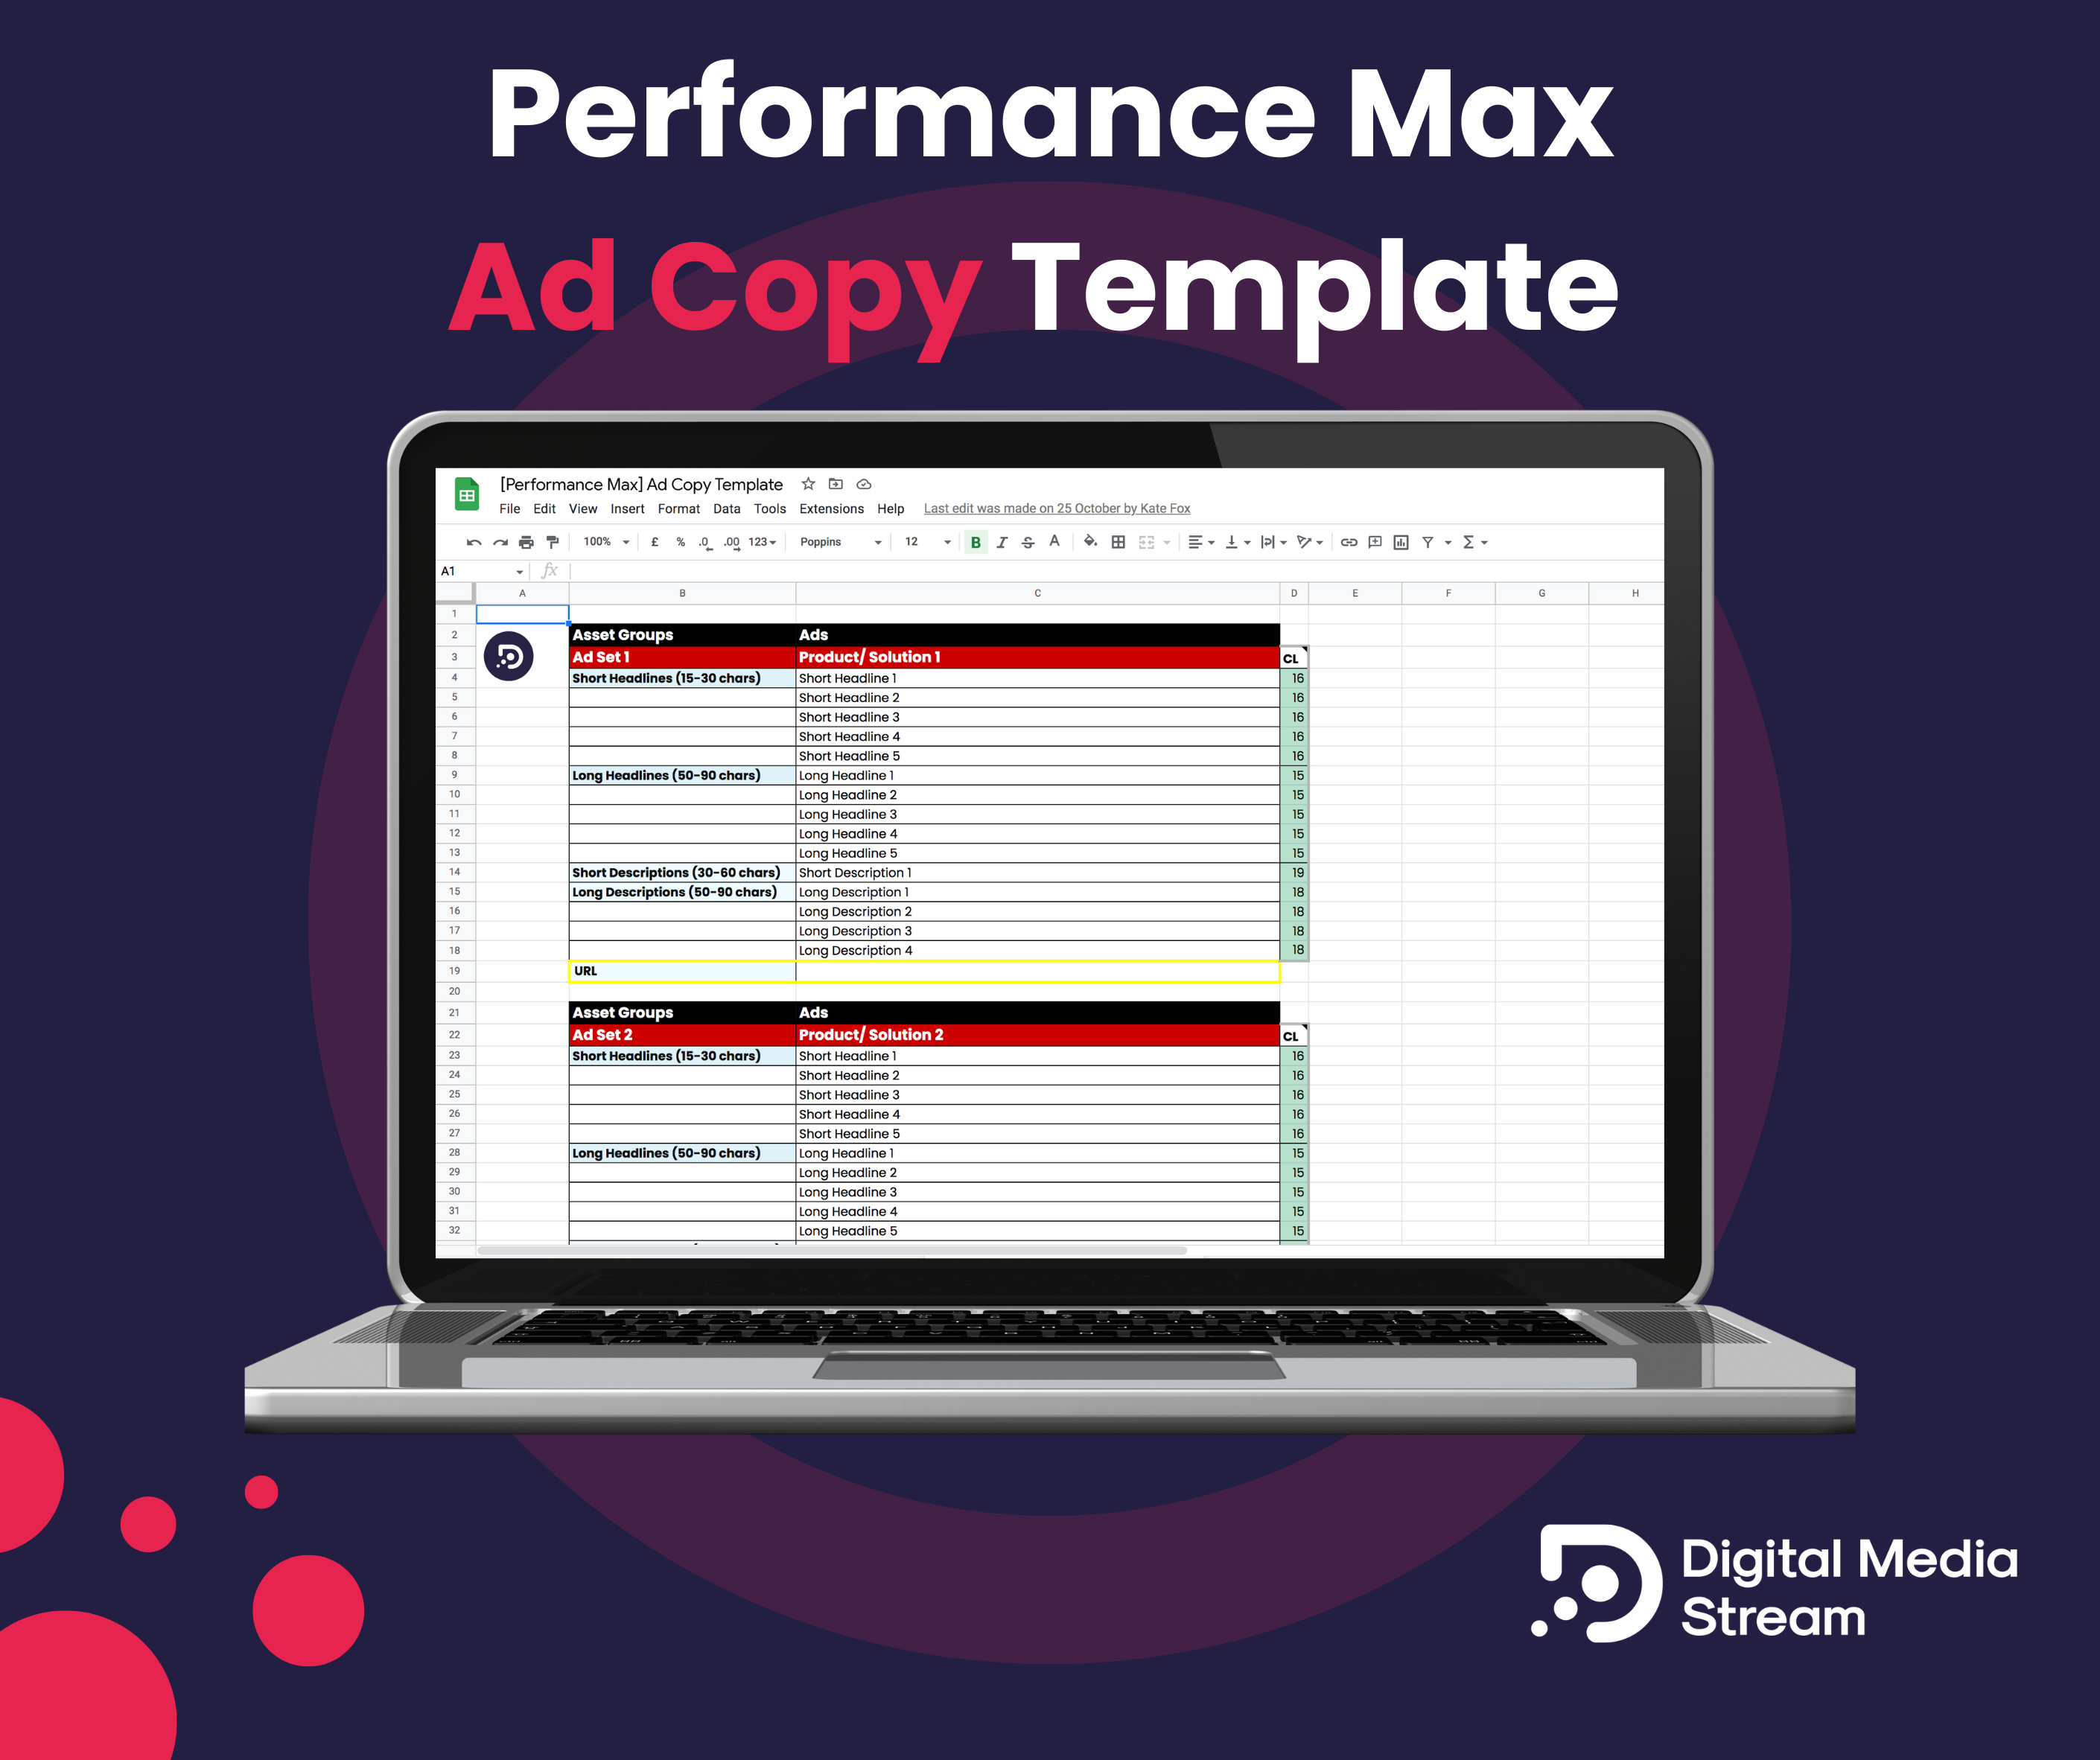 Performance Max Ad Copy Template